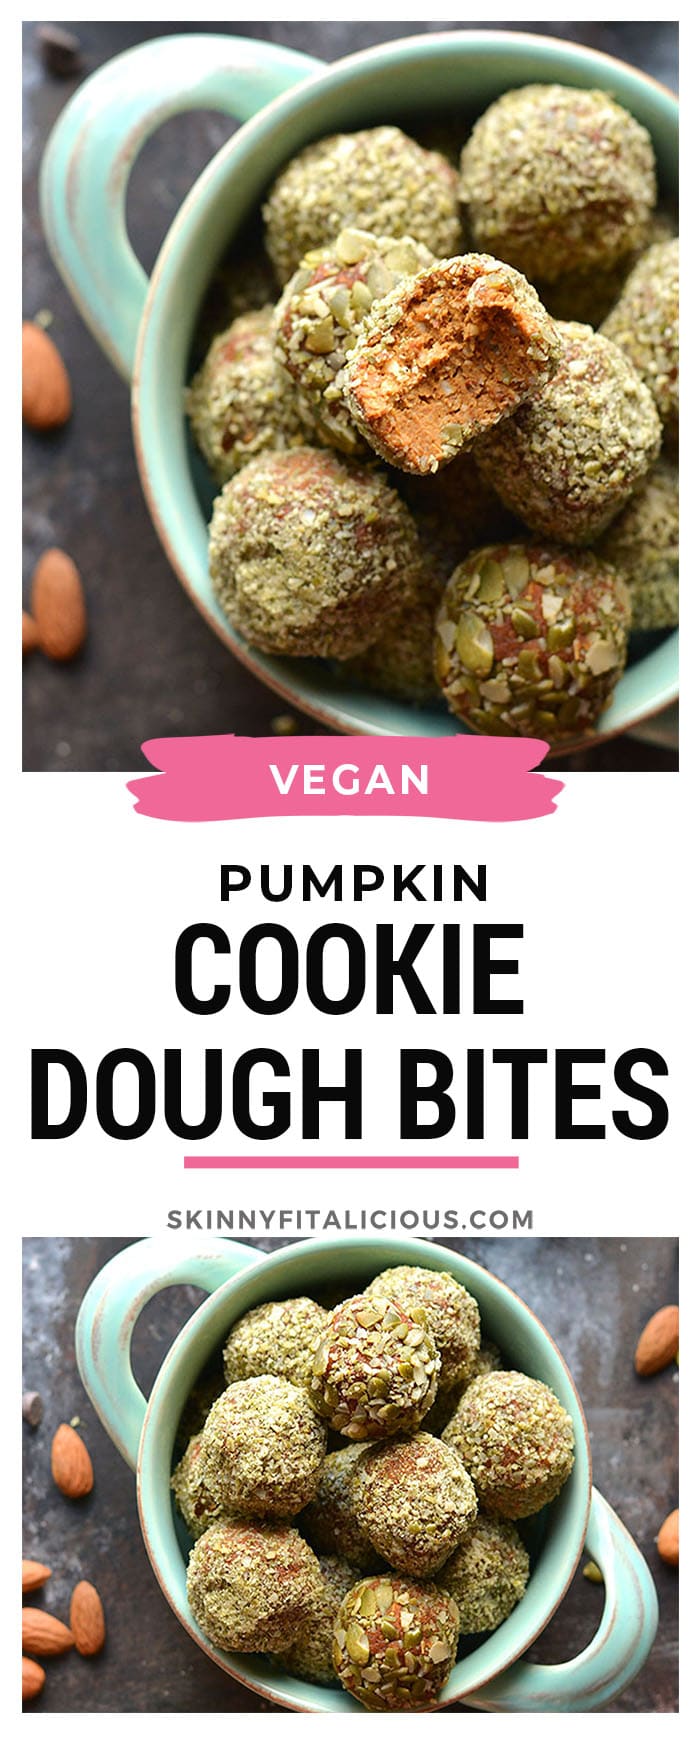 Pumpkin Cookie Dough Bites packed with a nutty, oat crunch on the outside and filled with warm, fall spices on the inside. A chocolatey treat that's deceptively healthy! Gluten Free + Low Calorie + Vegan